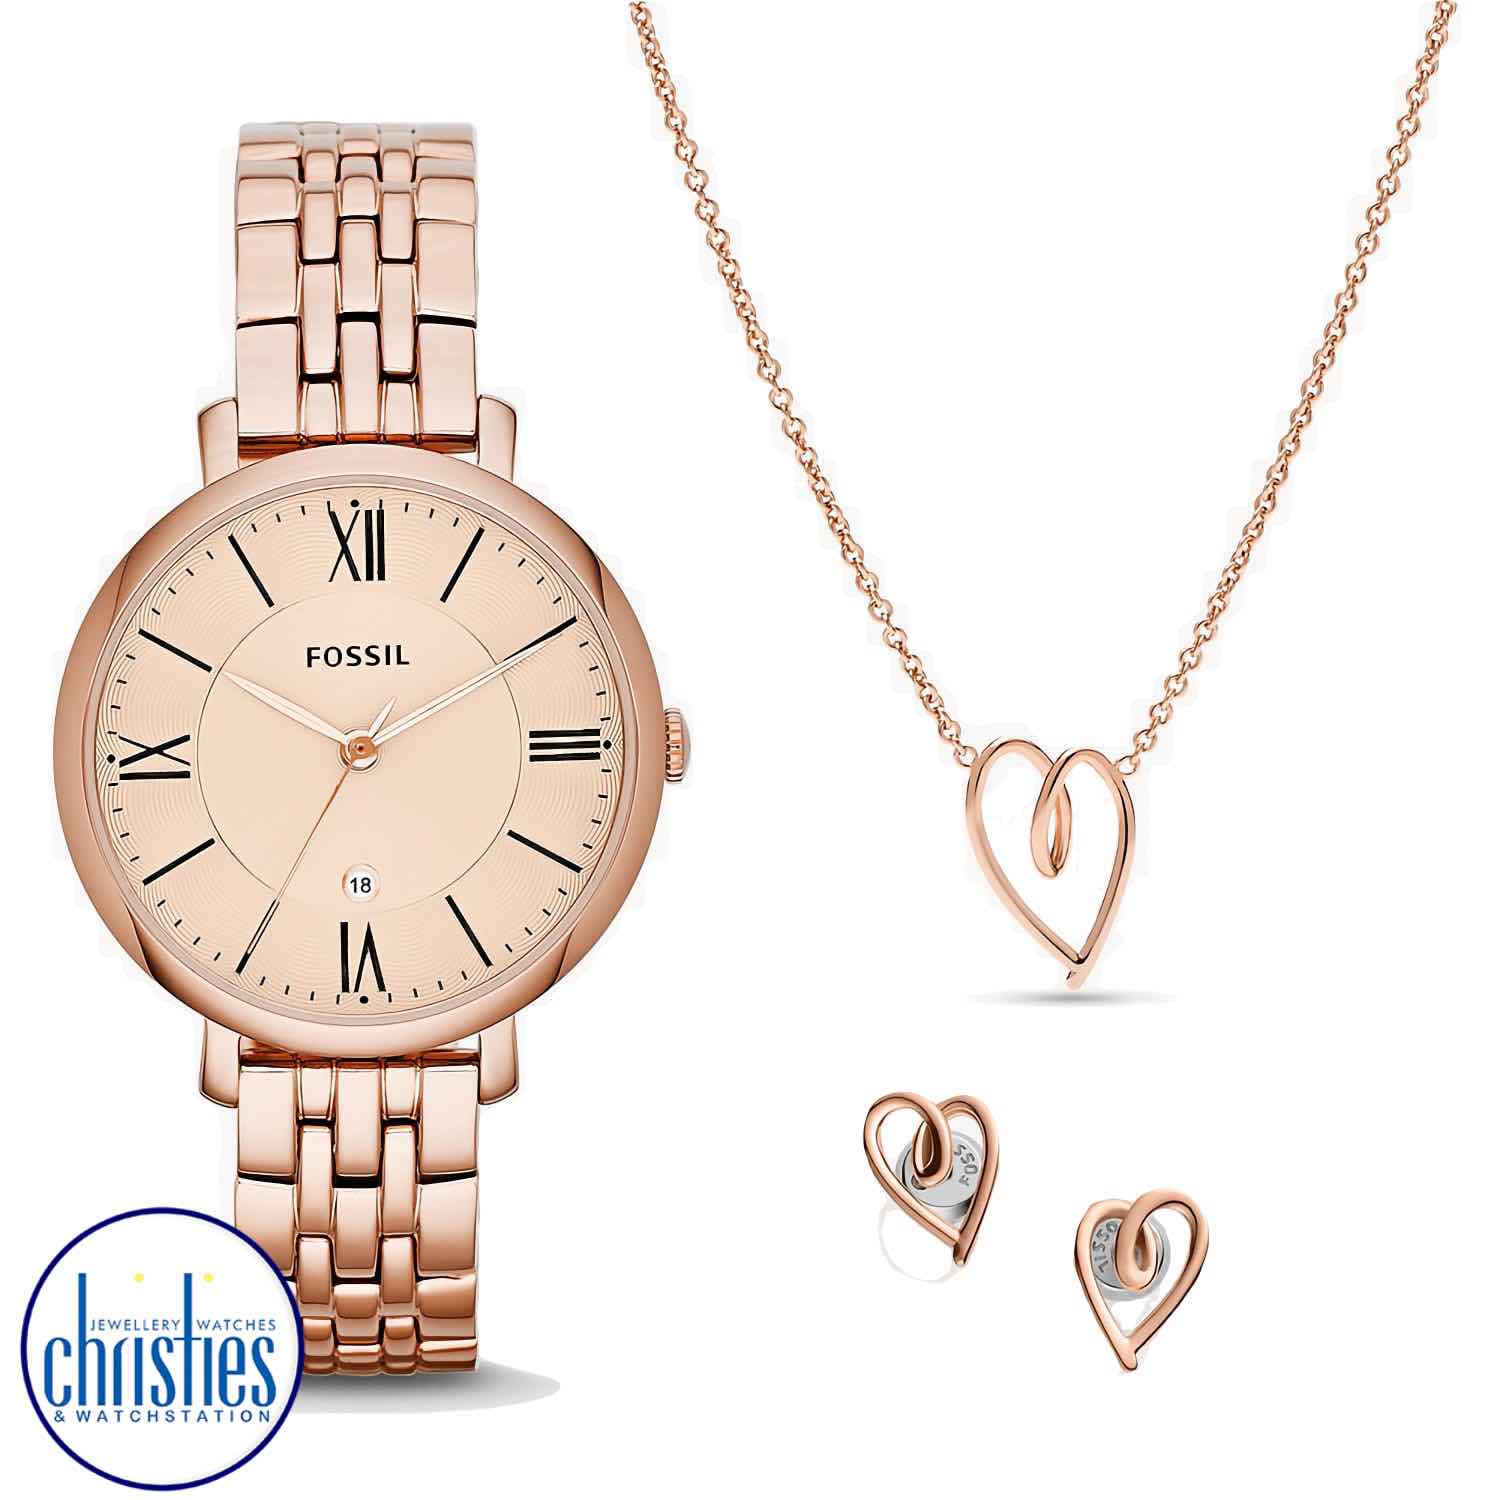 ES5252SET Fossil Jaqueline Three-Hand Date Rose Gold-Tone Stainless Steel Watch and Jewellery Set. ES5252SET Fossil Jaqueline Three-Hand Date Rose Gold-Tone Stainless Steel Watch and Jewellery SetAfterpay - Split your purchase into 4 instalments - Pay for